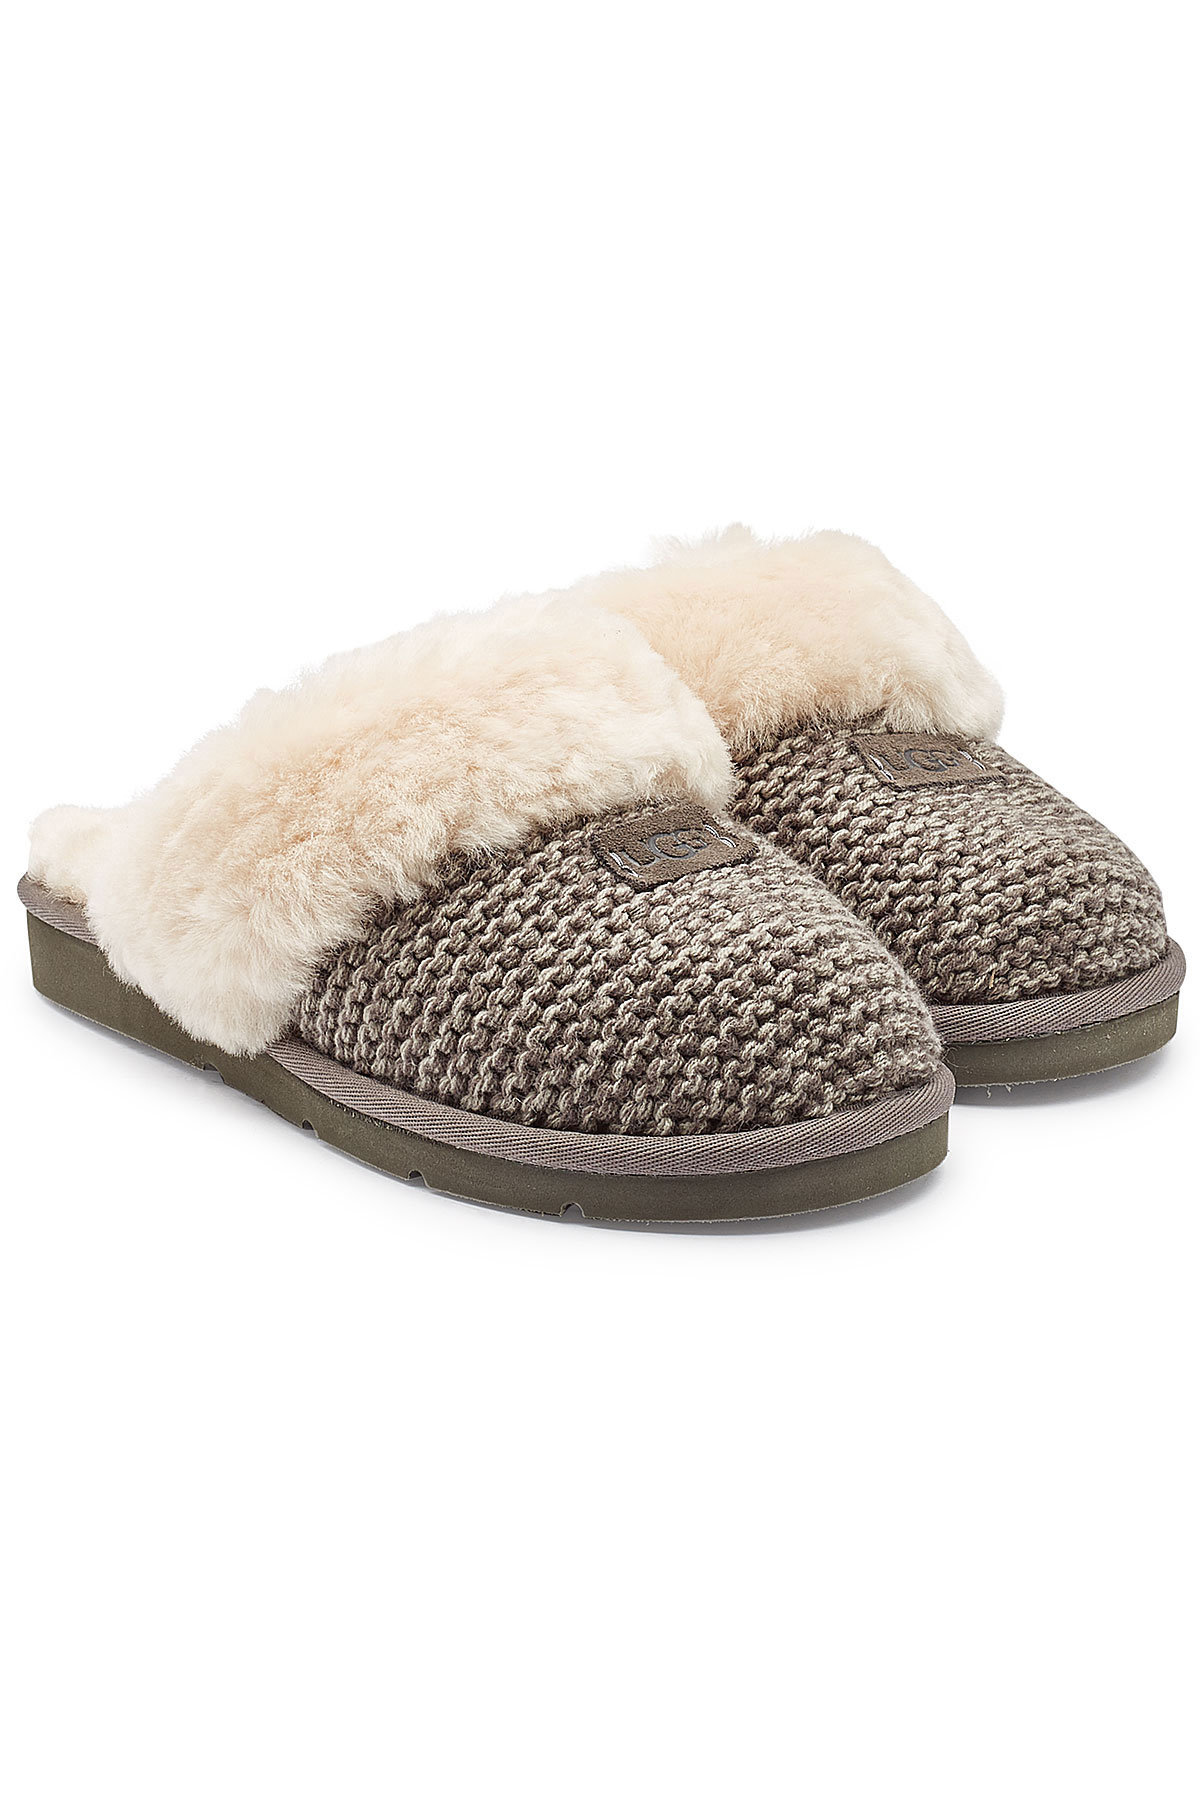 ugg cozy knit cable slippers